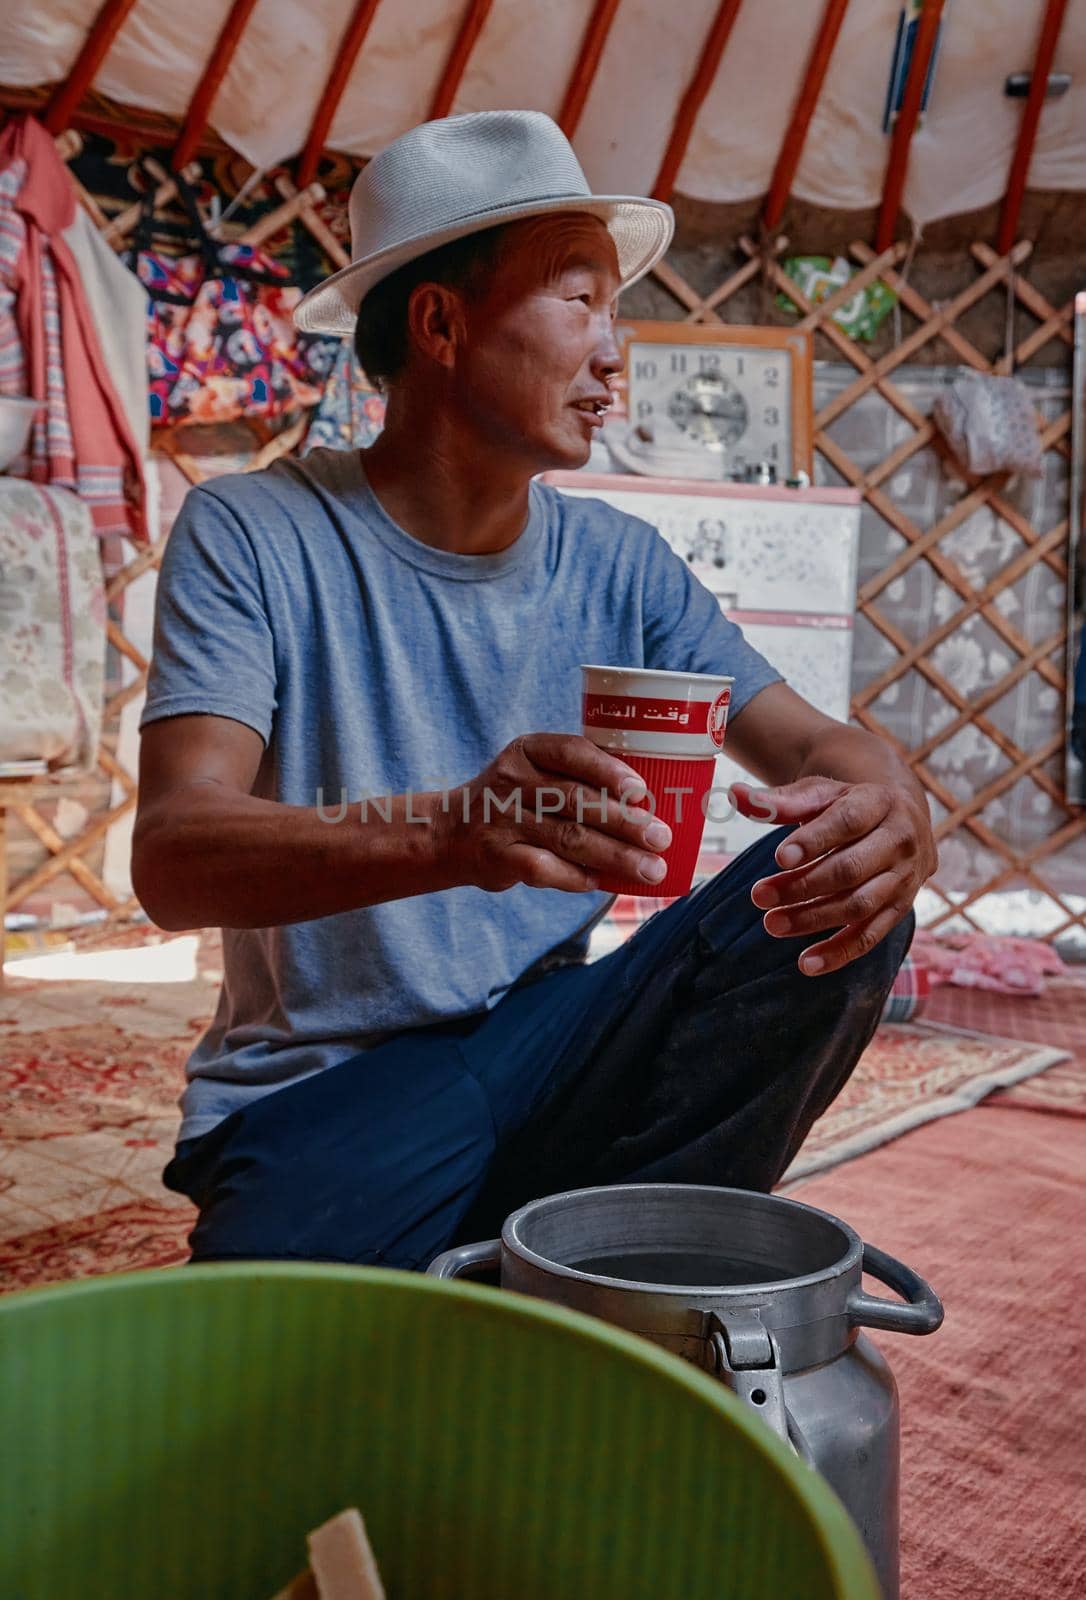 Life of the Mongolian Yurt. Interior of the nomad's house. The man pours some home brew, tasting of home-made alcohol. 06.09.2019. Gobi Desert, Mongolia. by EvgeniyQW